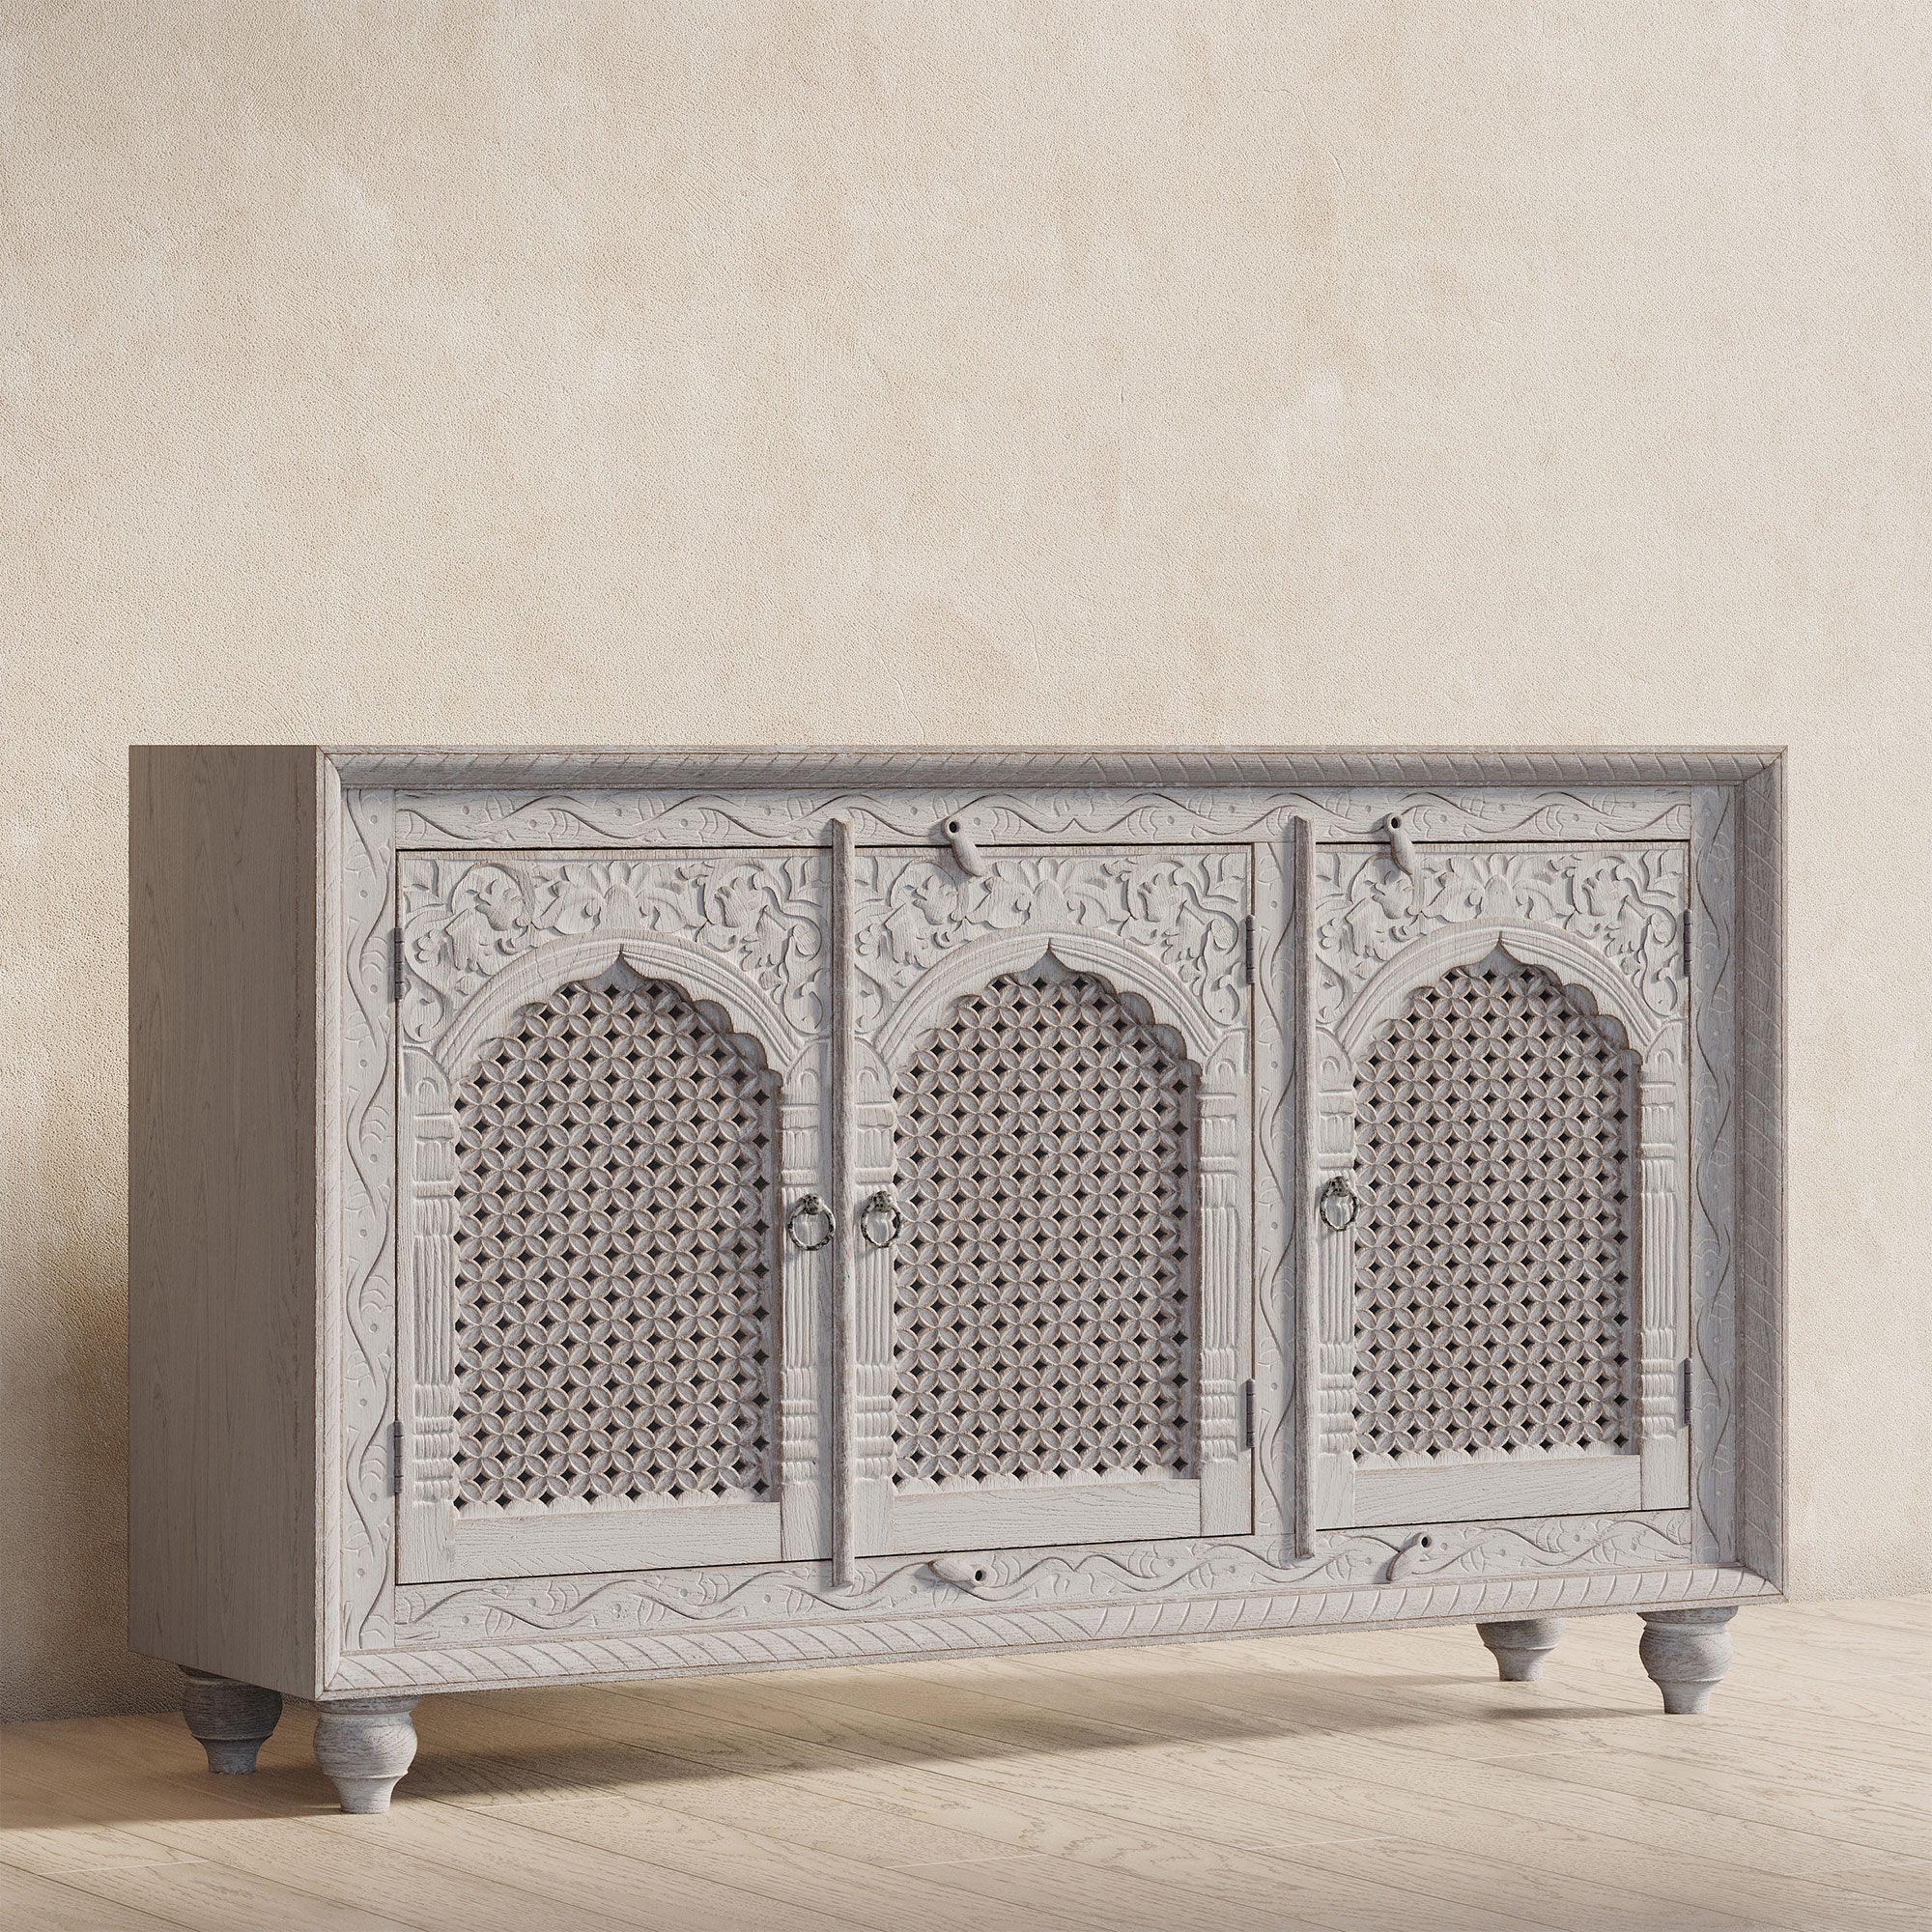 Patrin Nomad Wooden Sideboard in Distressed White Finish in Cabinets by VMInnovations